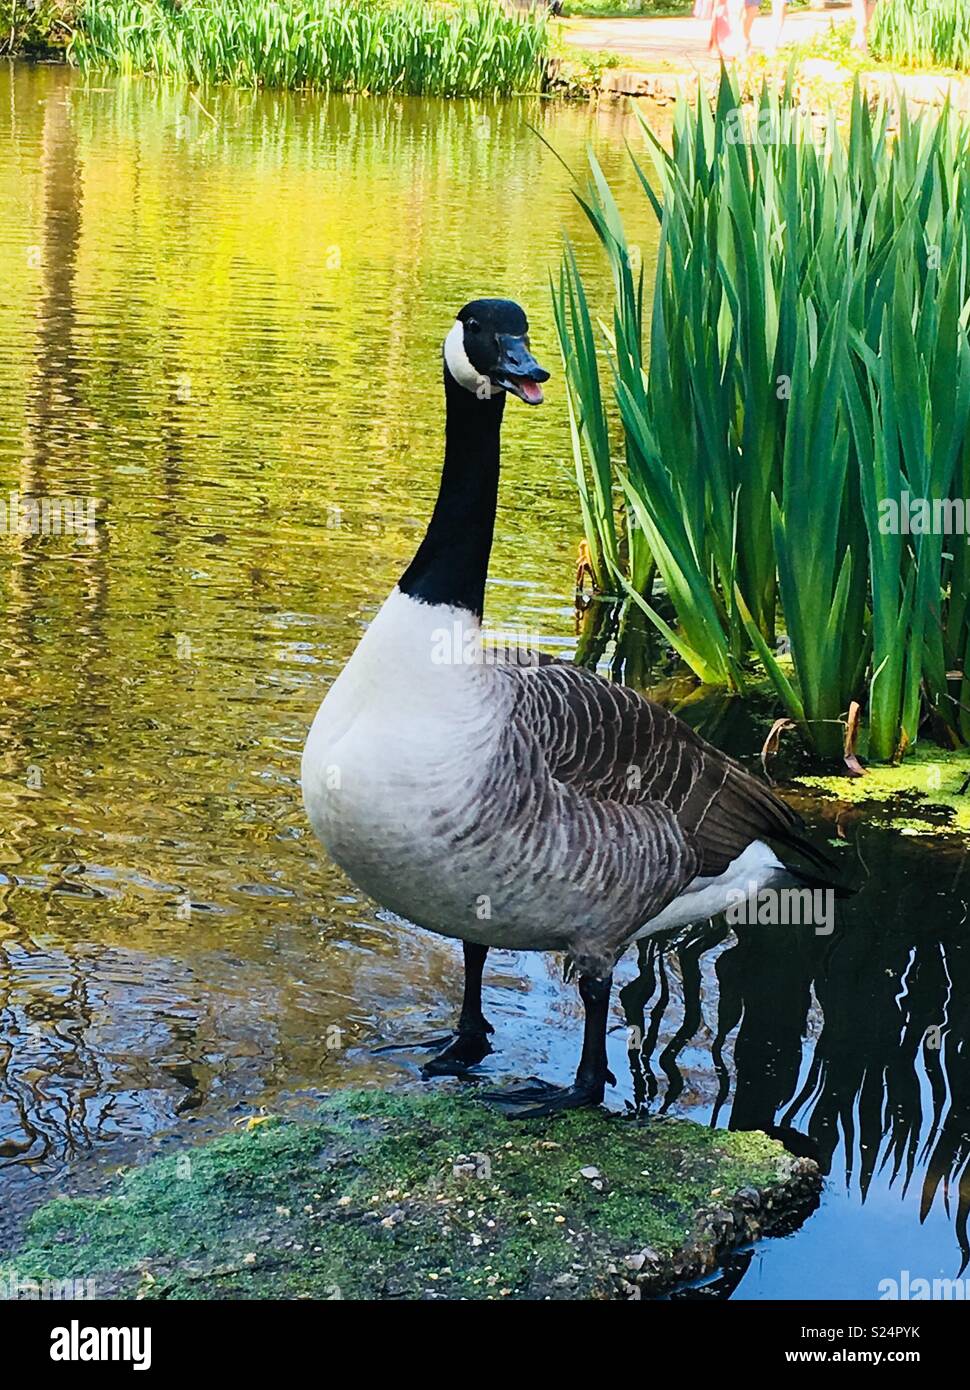 Noisy Canadian goose in a lake Stock Photo